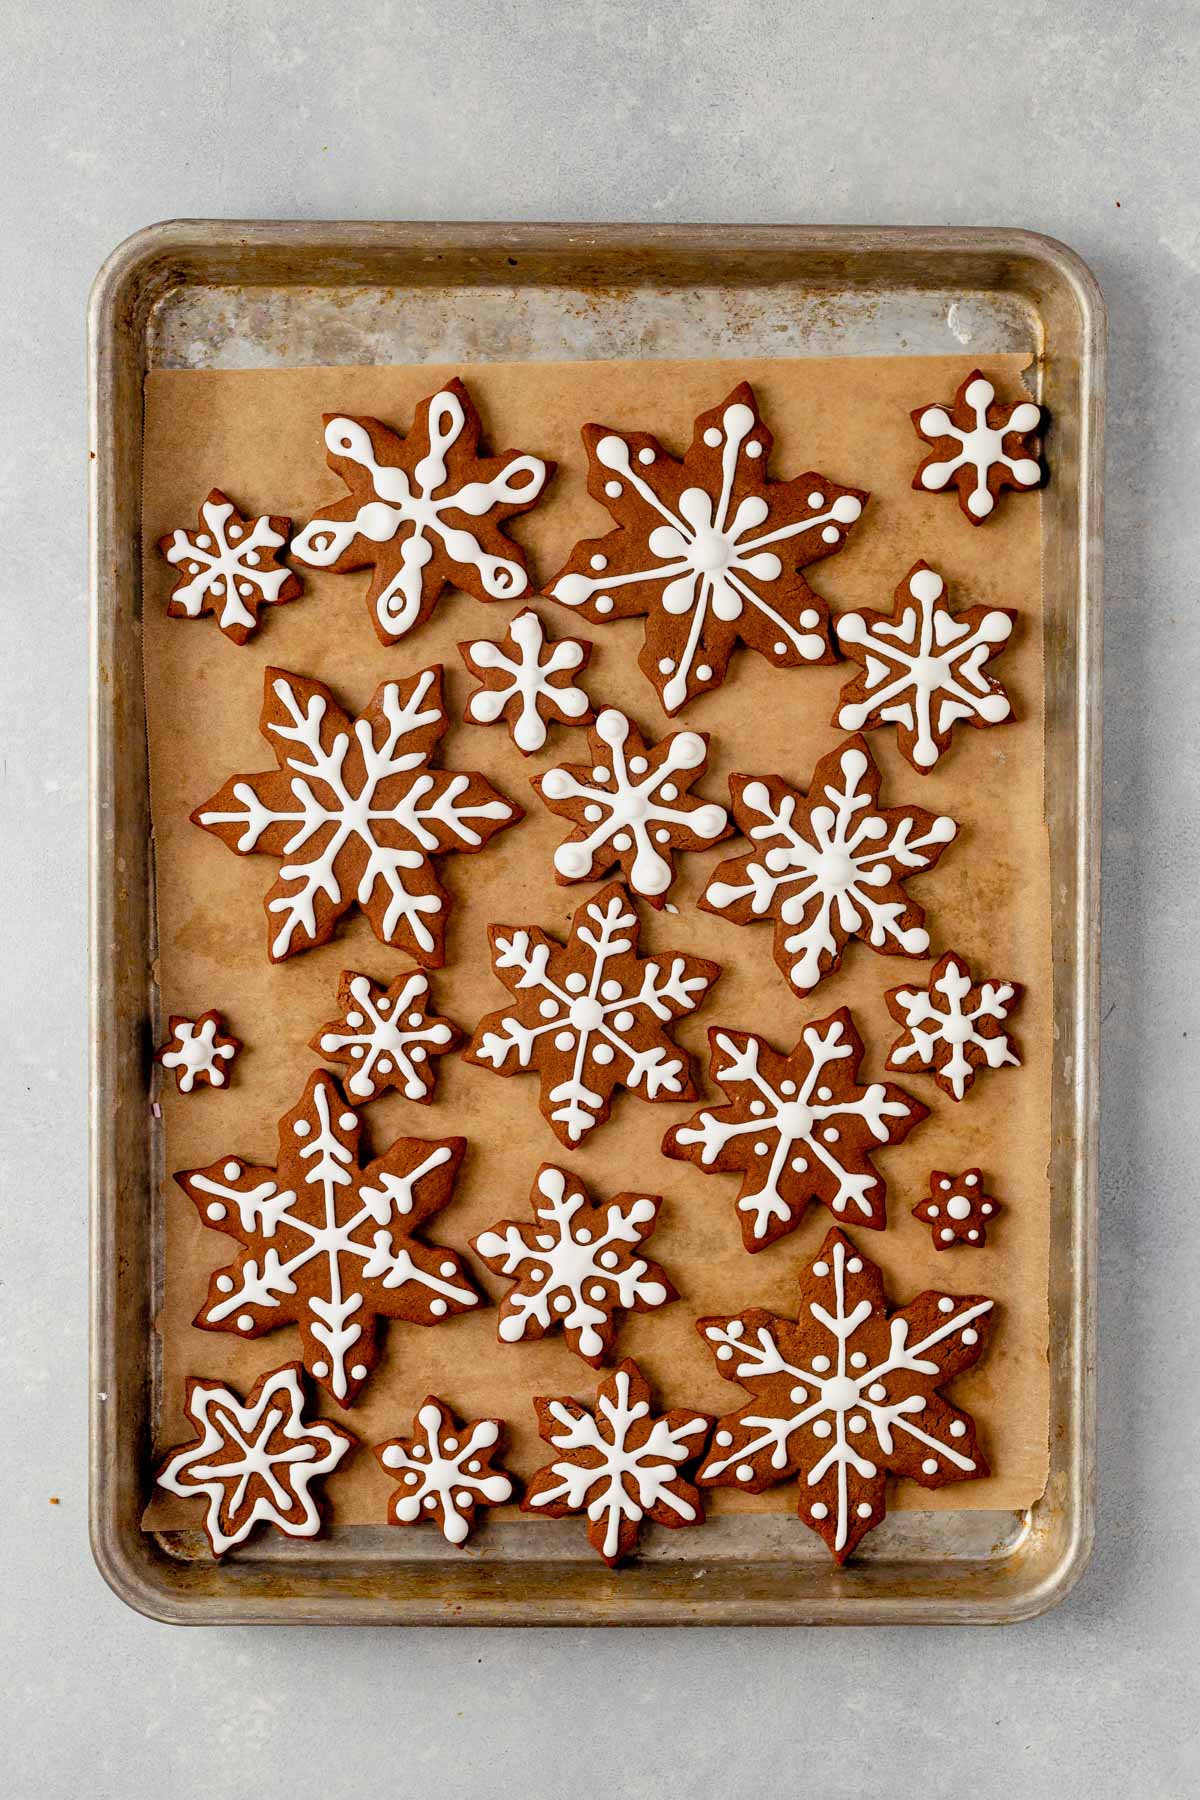 snowflake cookies with royal icing on a baking sheet